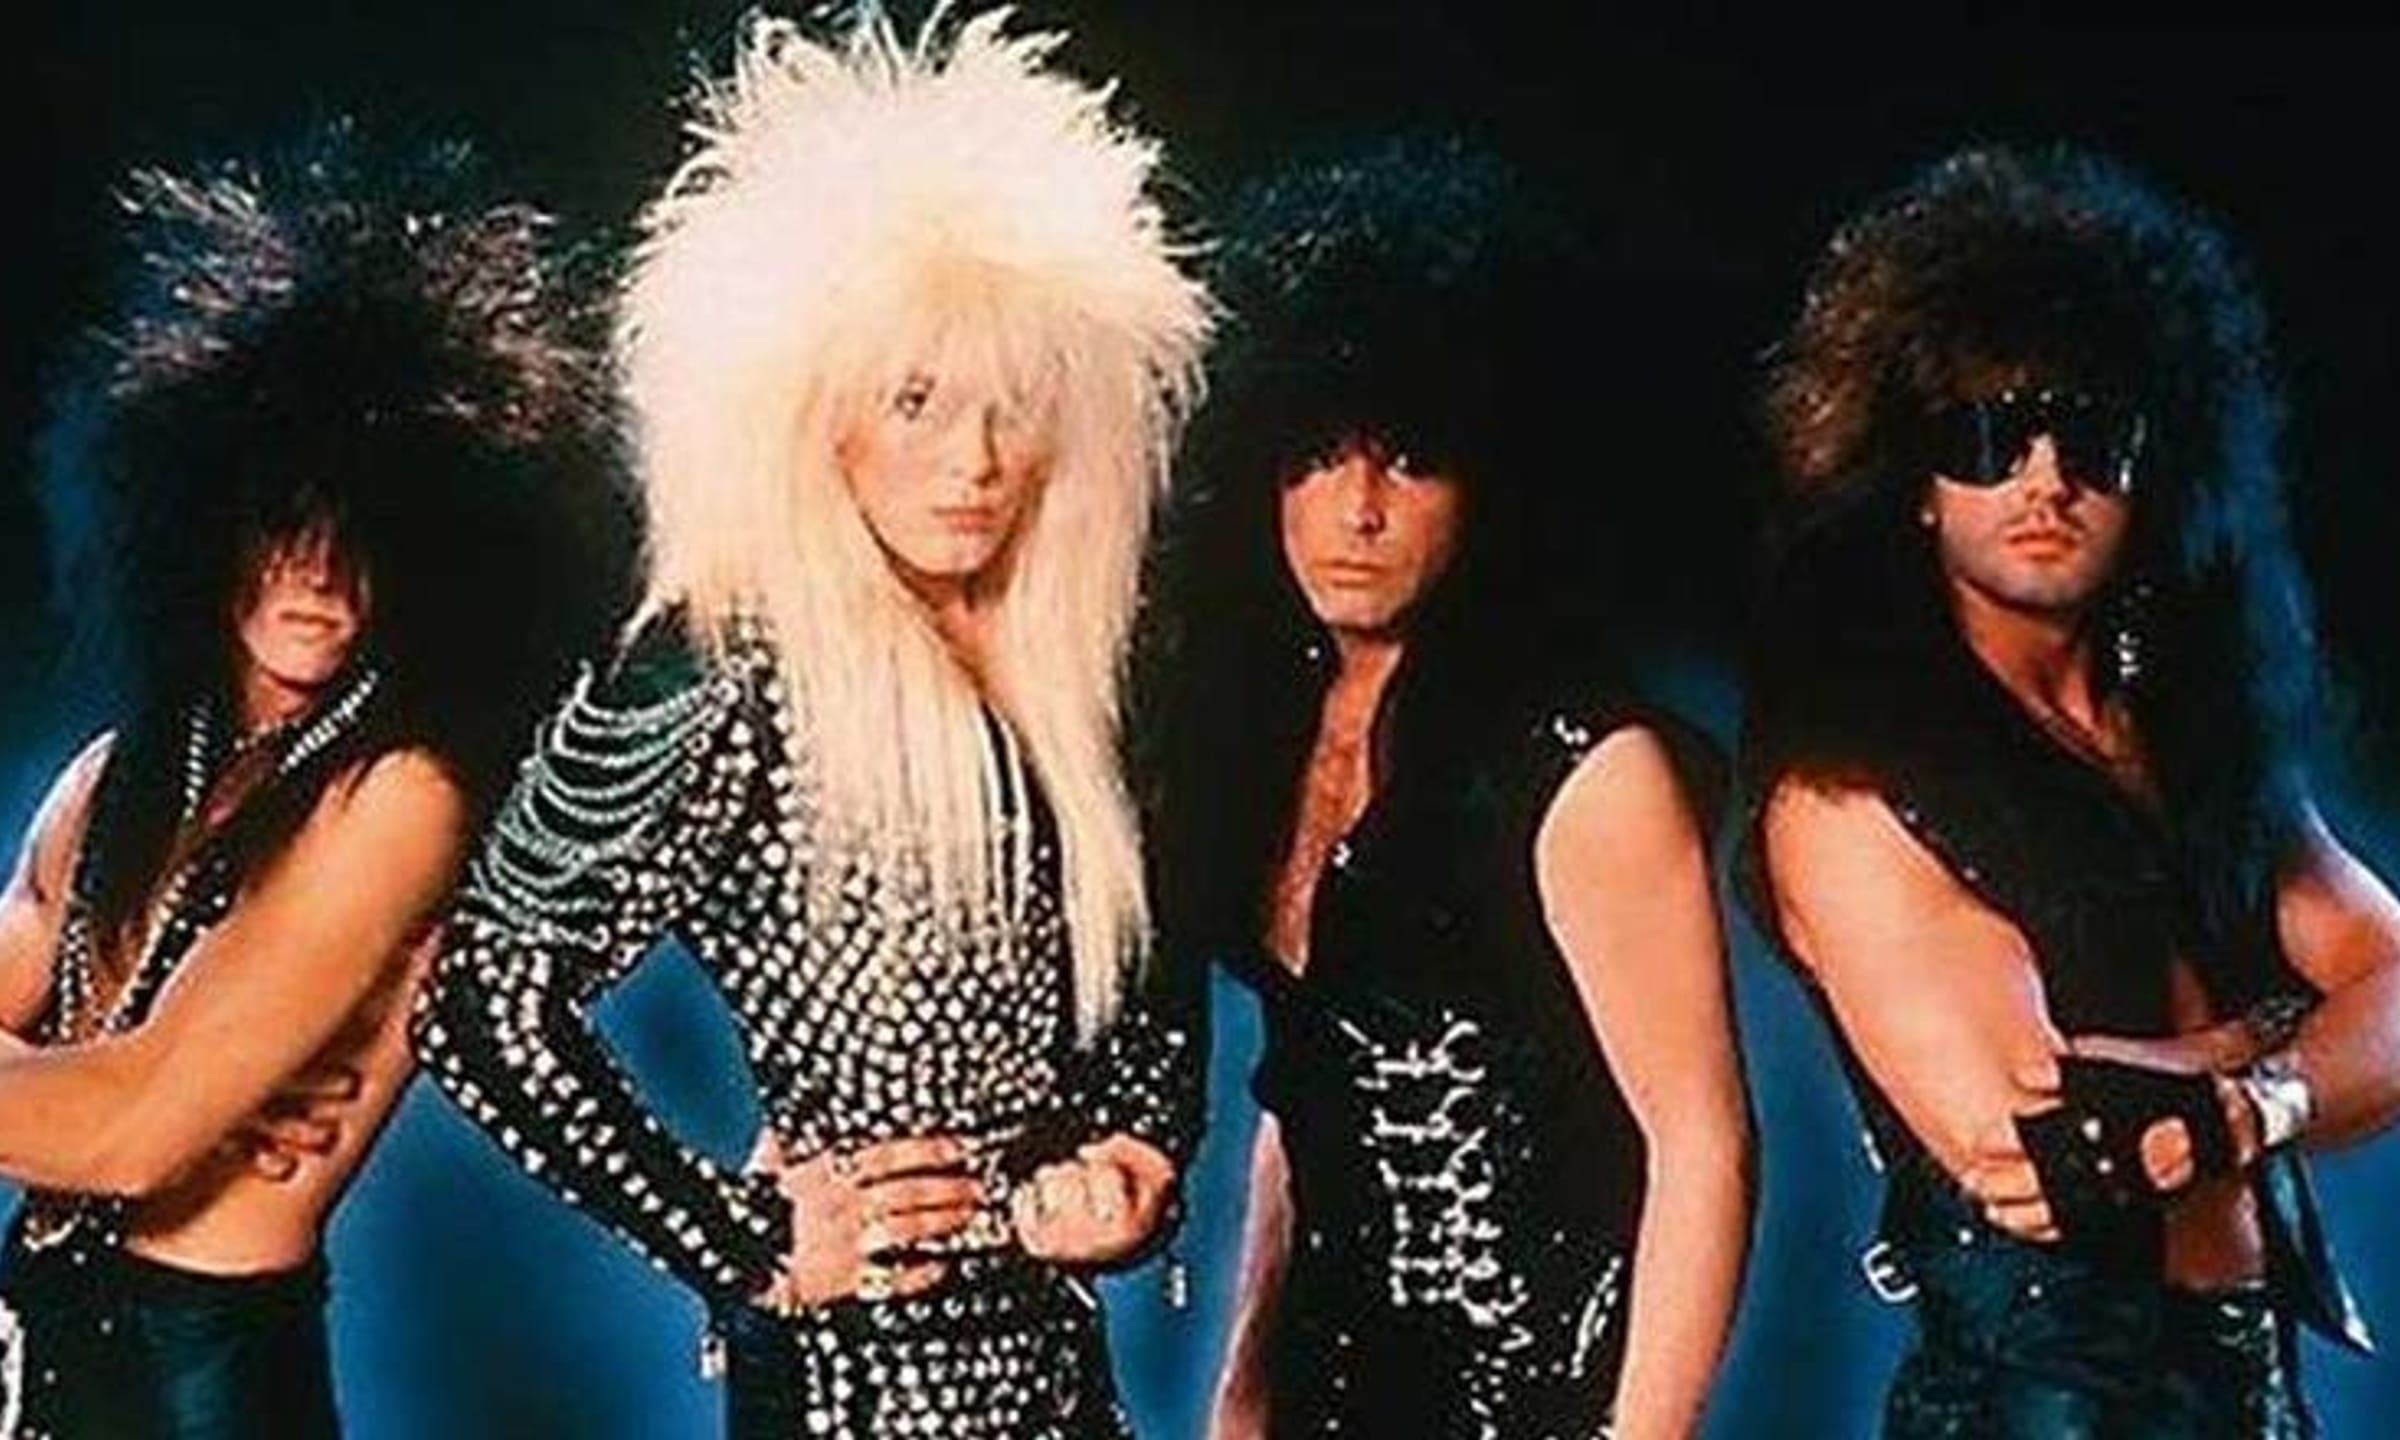 The Funniest '80s Glam Band Photos Ever